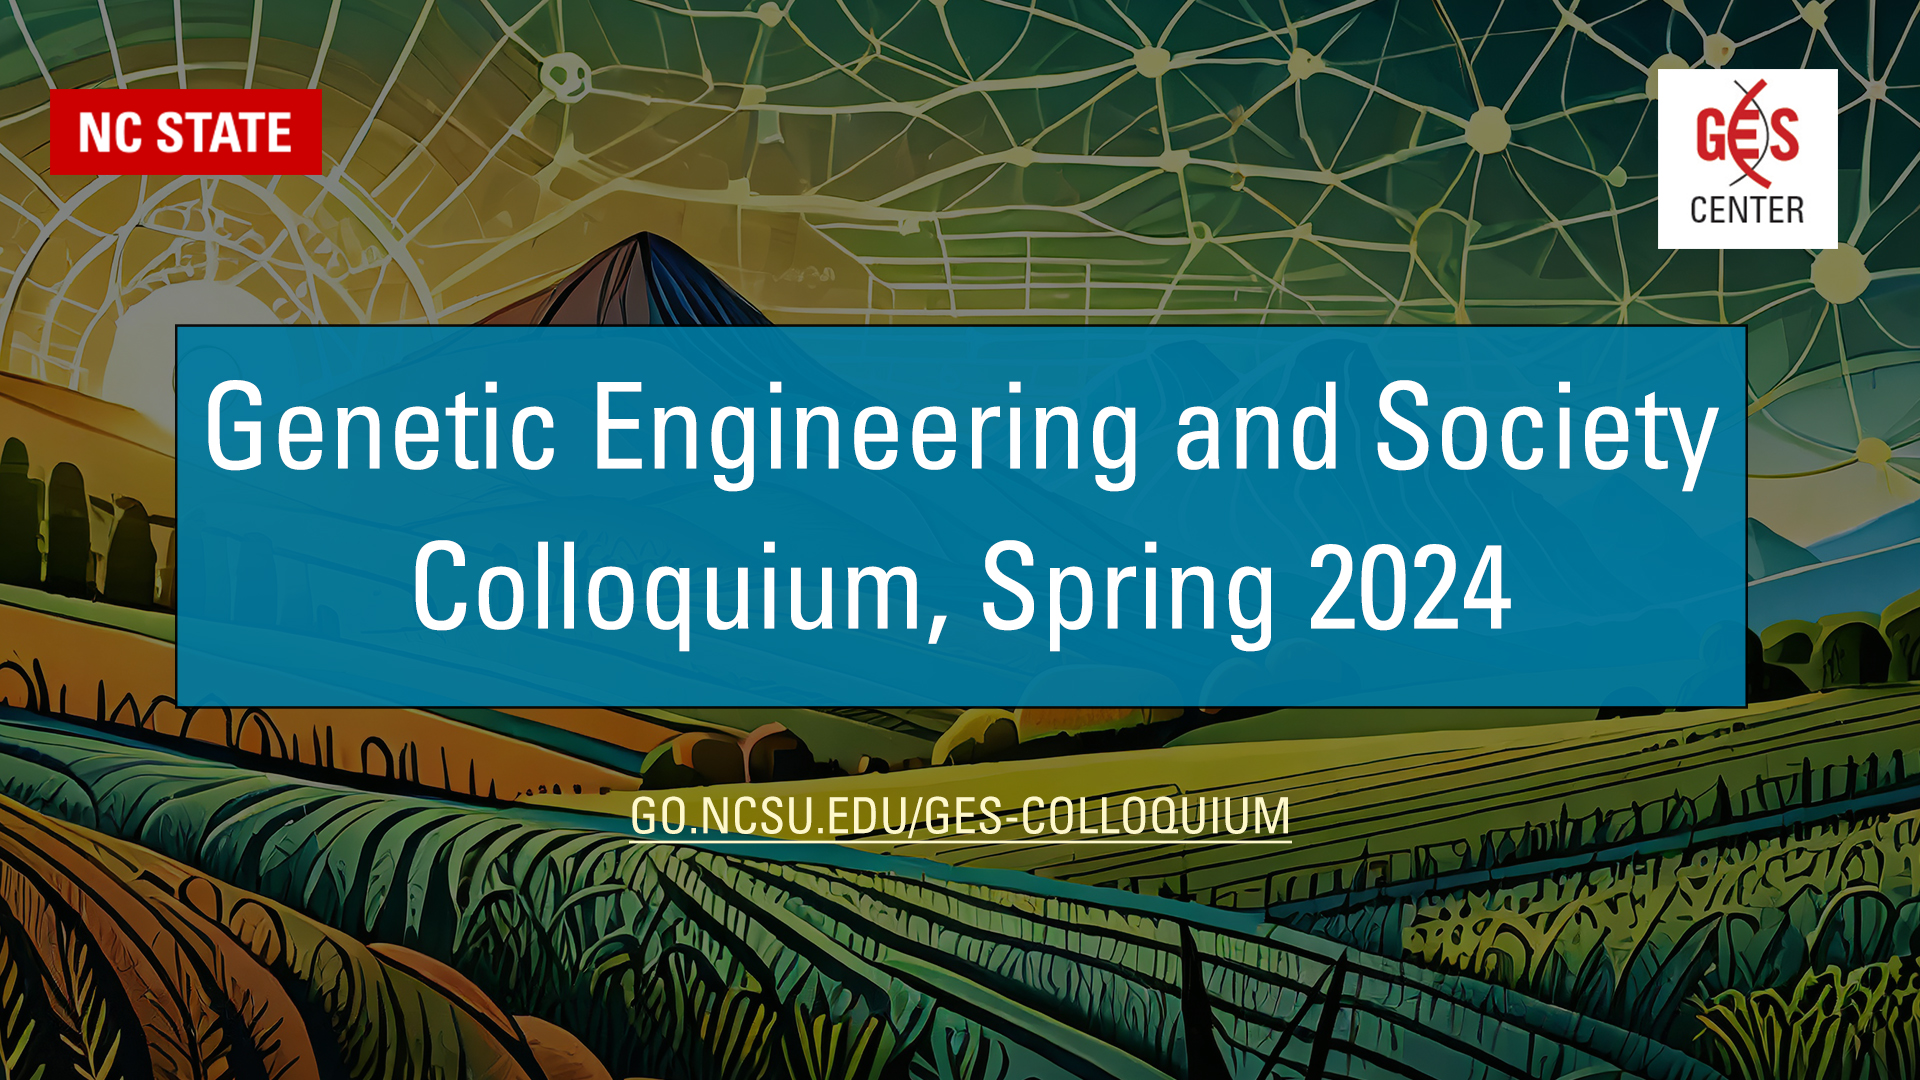 header - Genentic Engineering and Society Colloquium, Spring, 2024